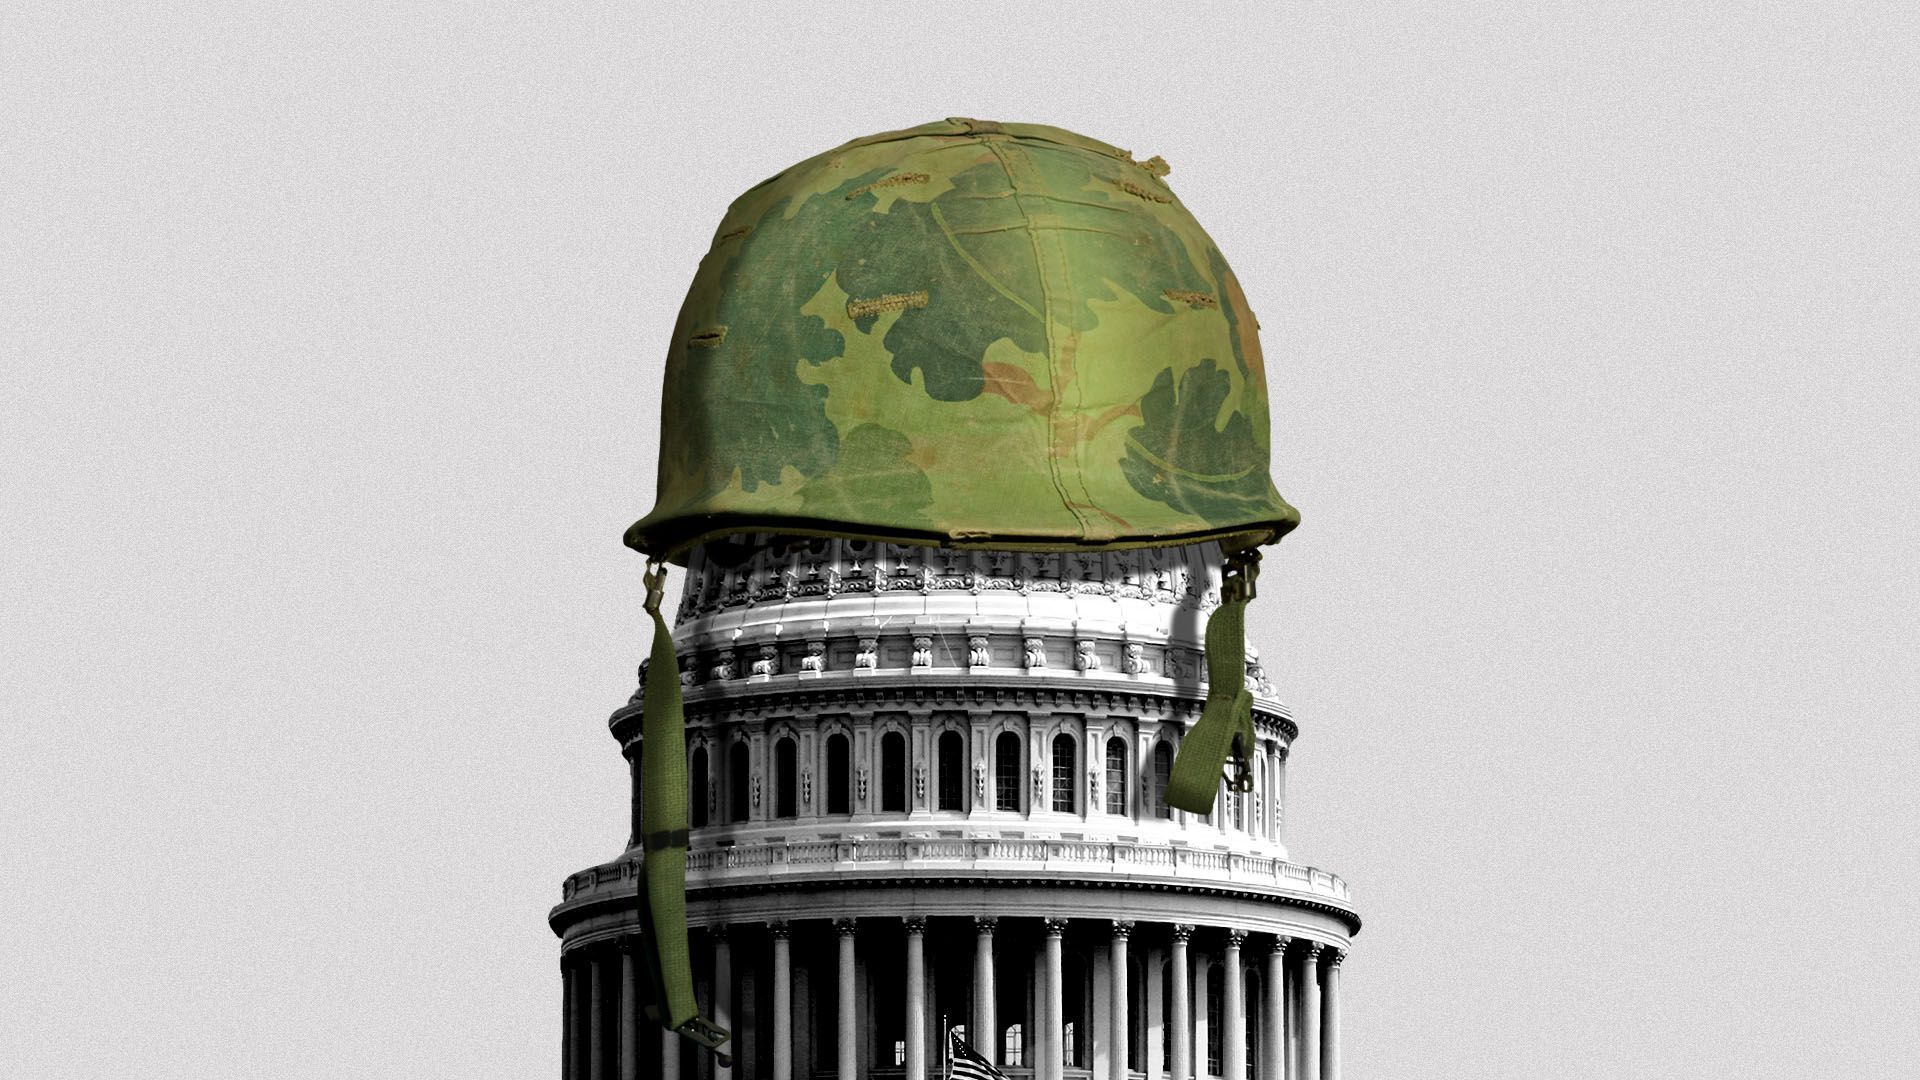 Illustration of an army helmet on top of the Capitol Dome